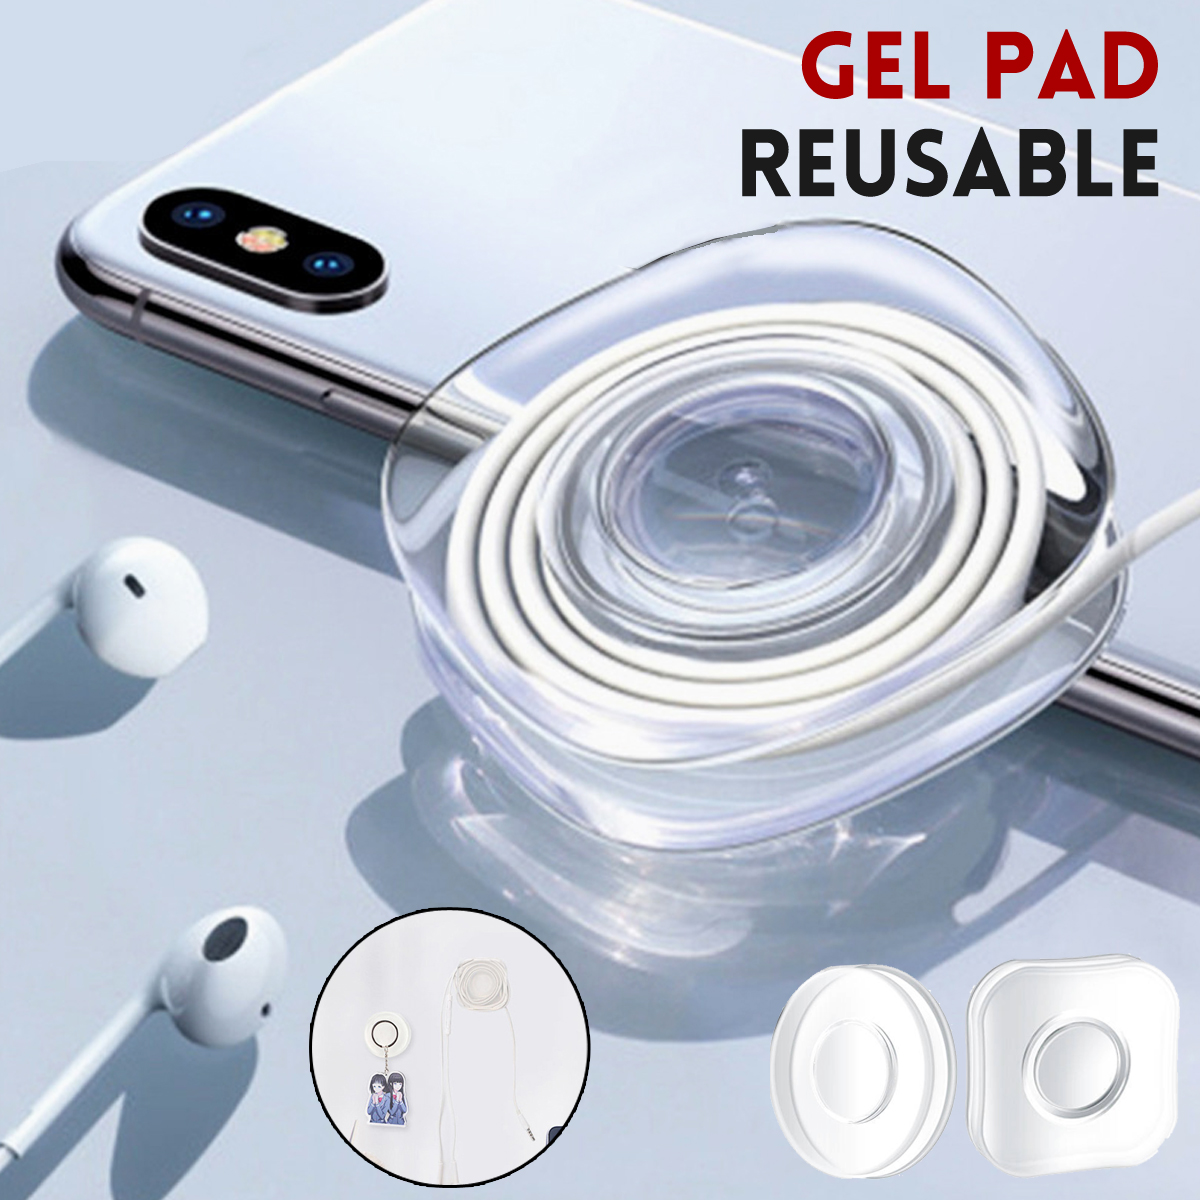 Reusable-Gel-Pad-Magic-Sticker-Washable-Traceless-Casual-Paste-Pad-Phone-Holder-1672213-1